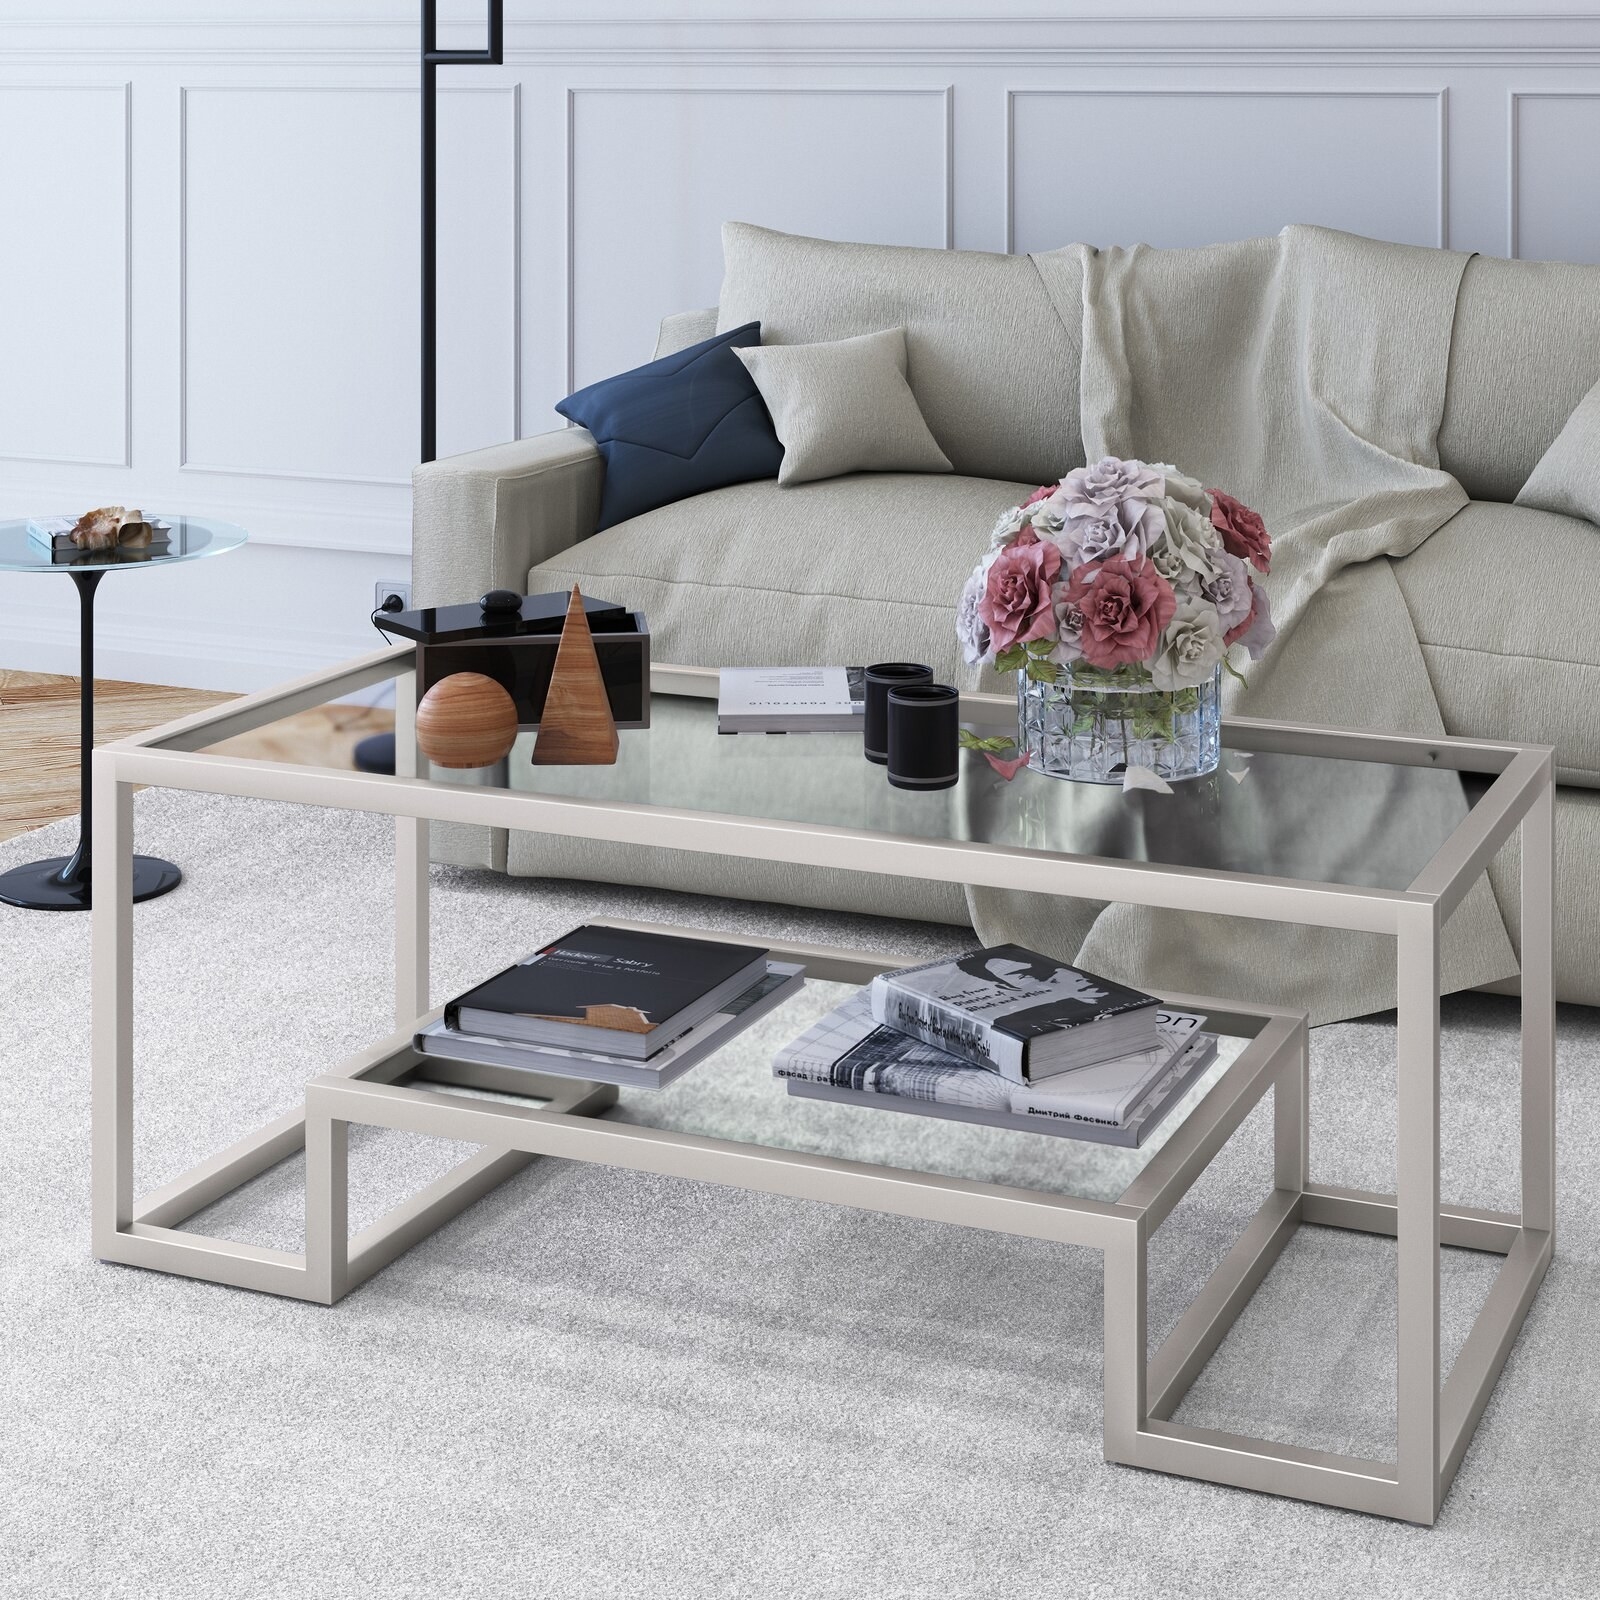 The satin nickel frame coffee table